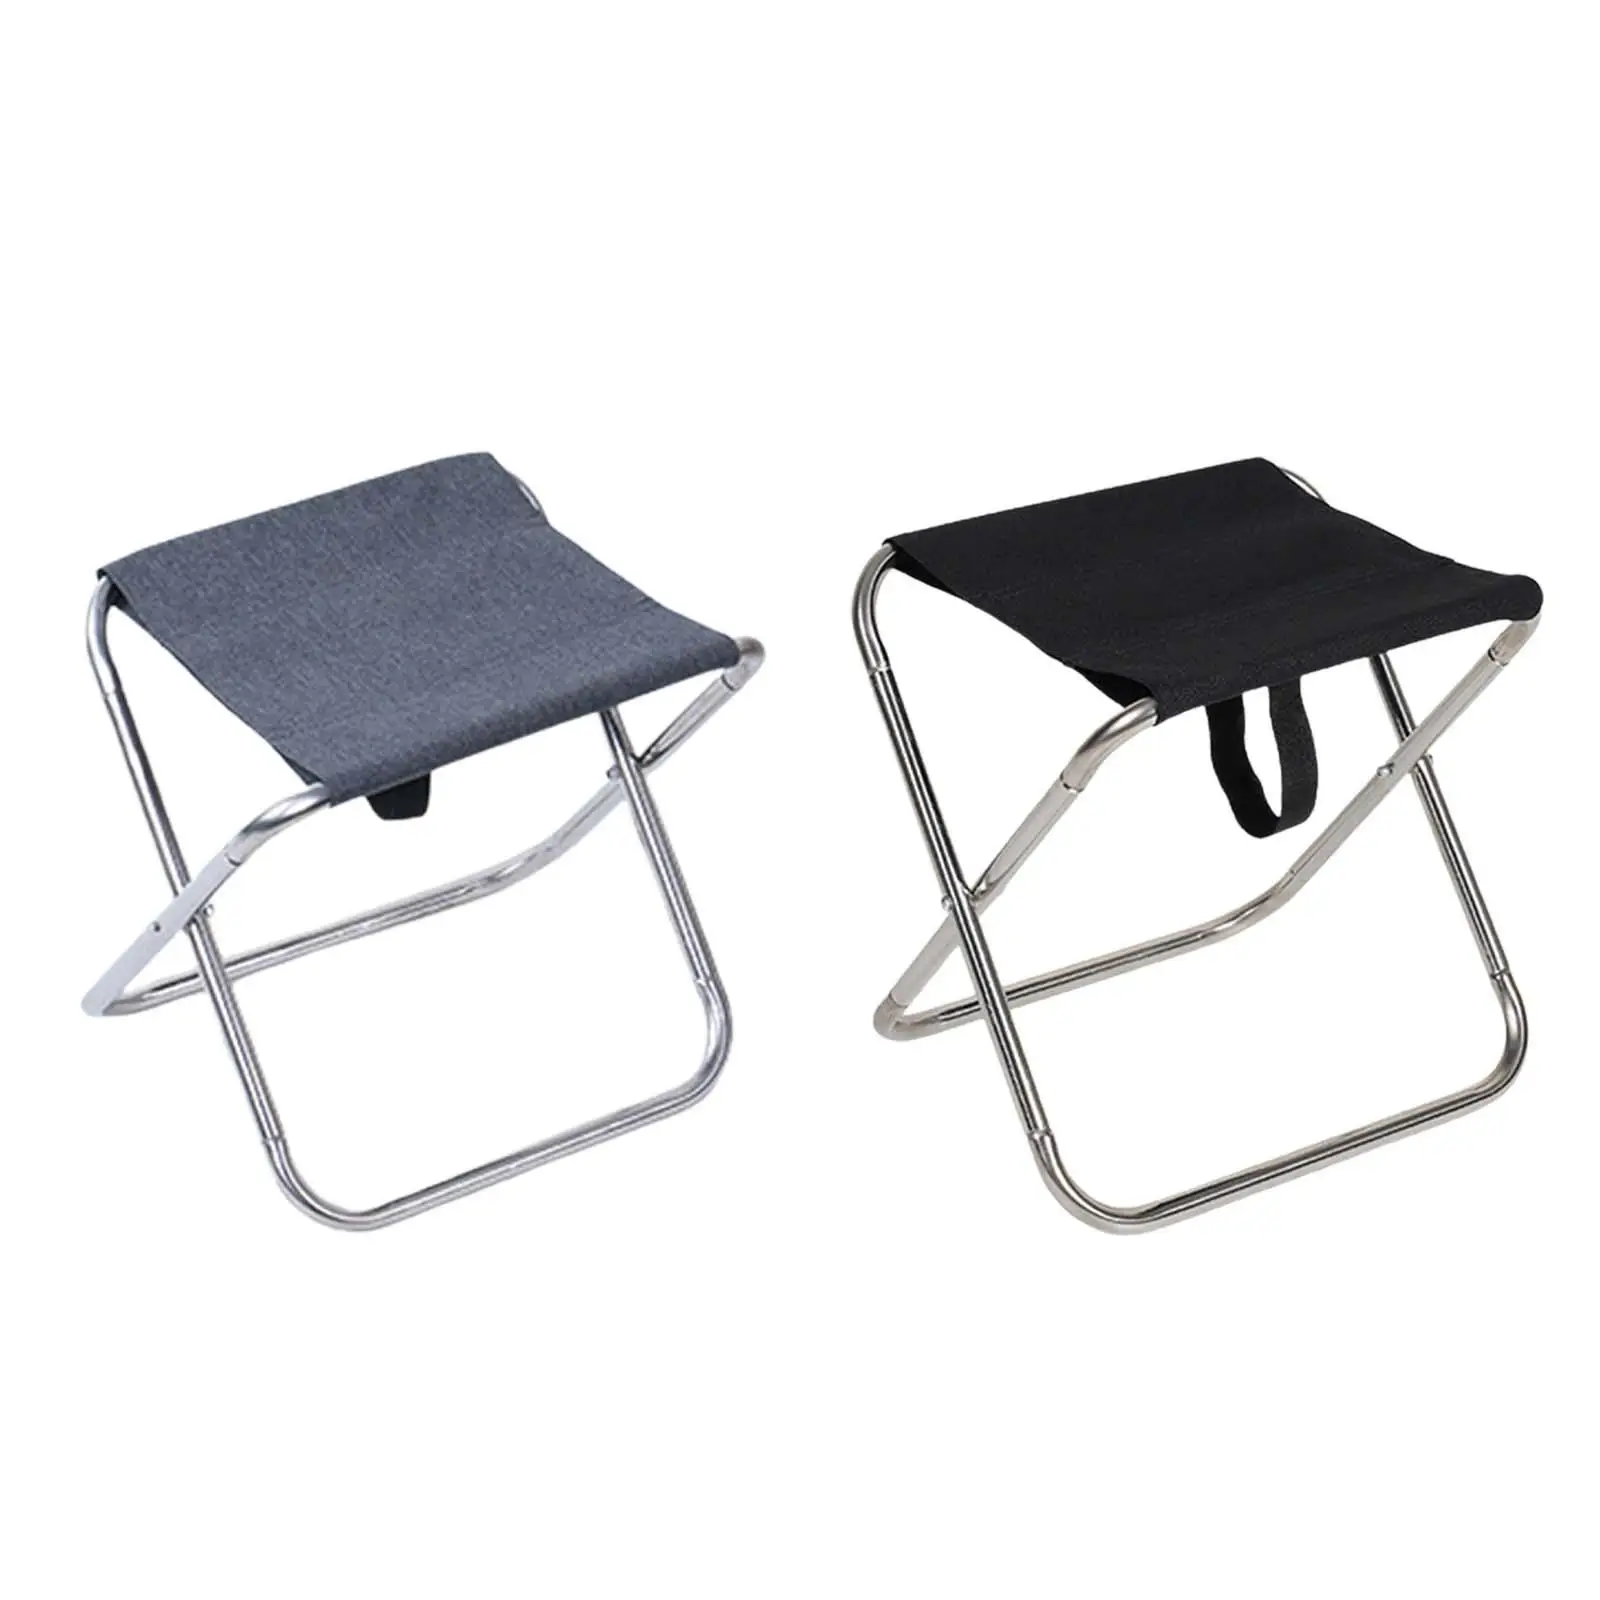 Camping Stool Folding Foldable Picnic Chair Ultralight Camp Stool Mini Saddle Chair for Gardening Barbecue Travel Concert Picnic